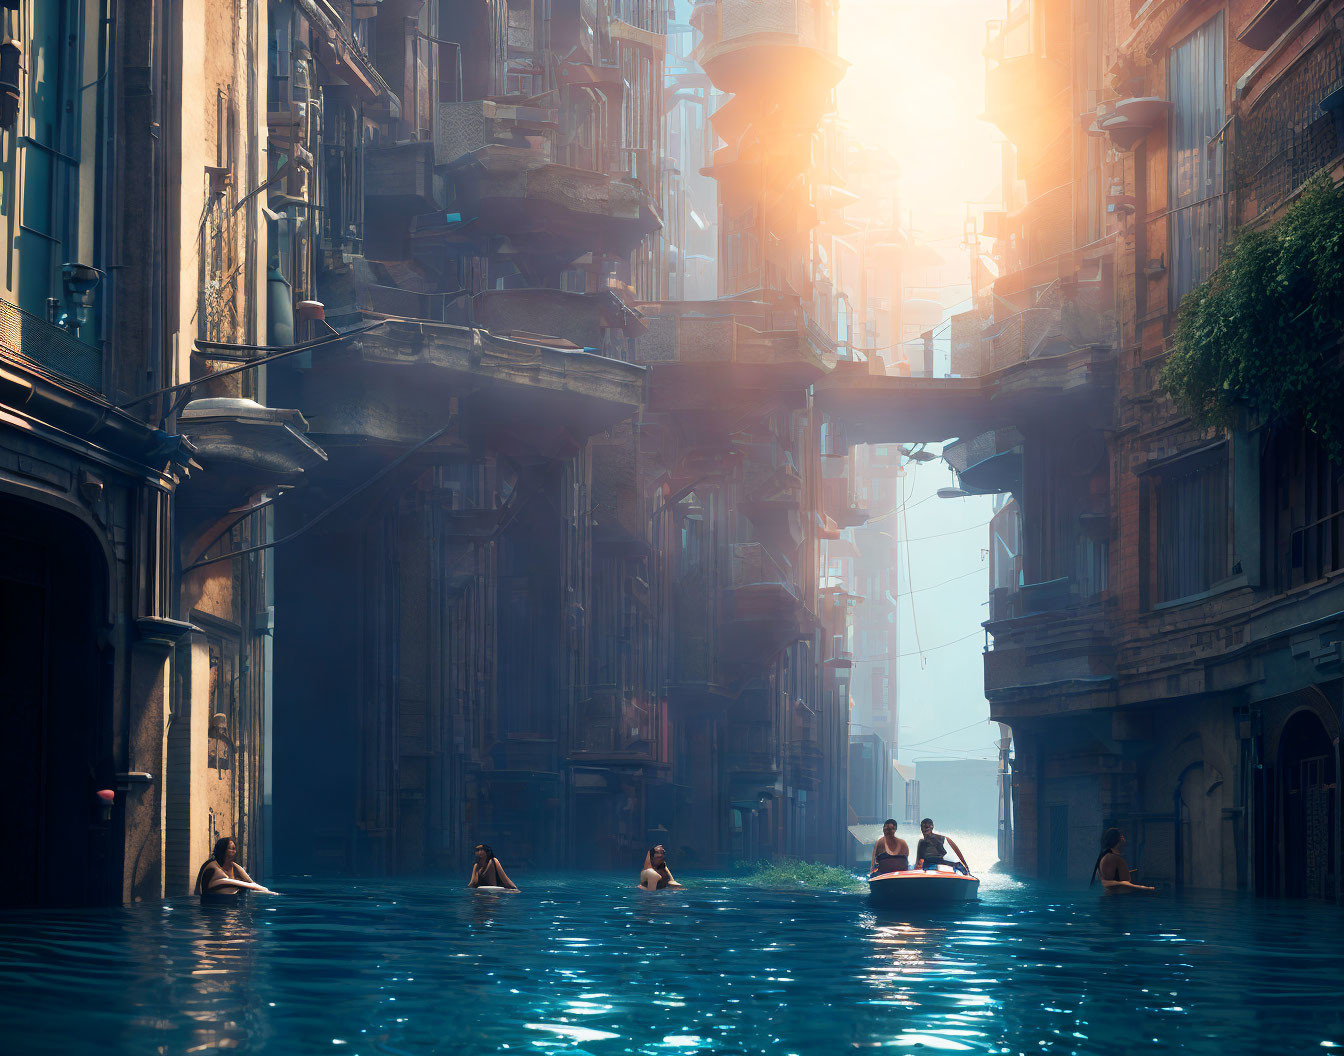 Sunlit Flooded Cityscape: People on Boats Amidst Buildings